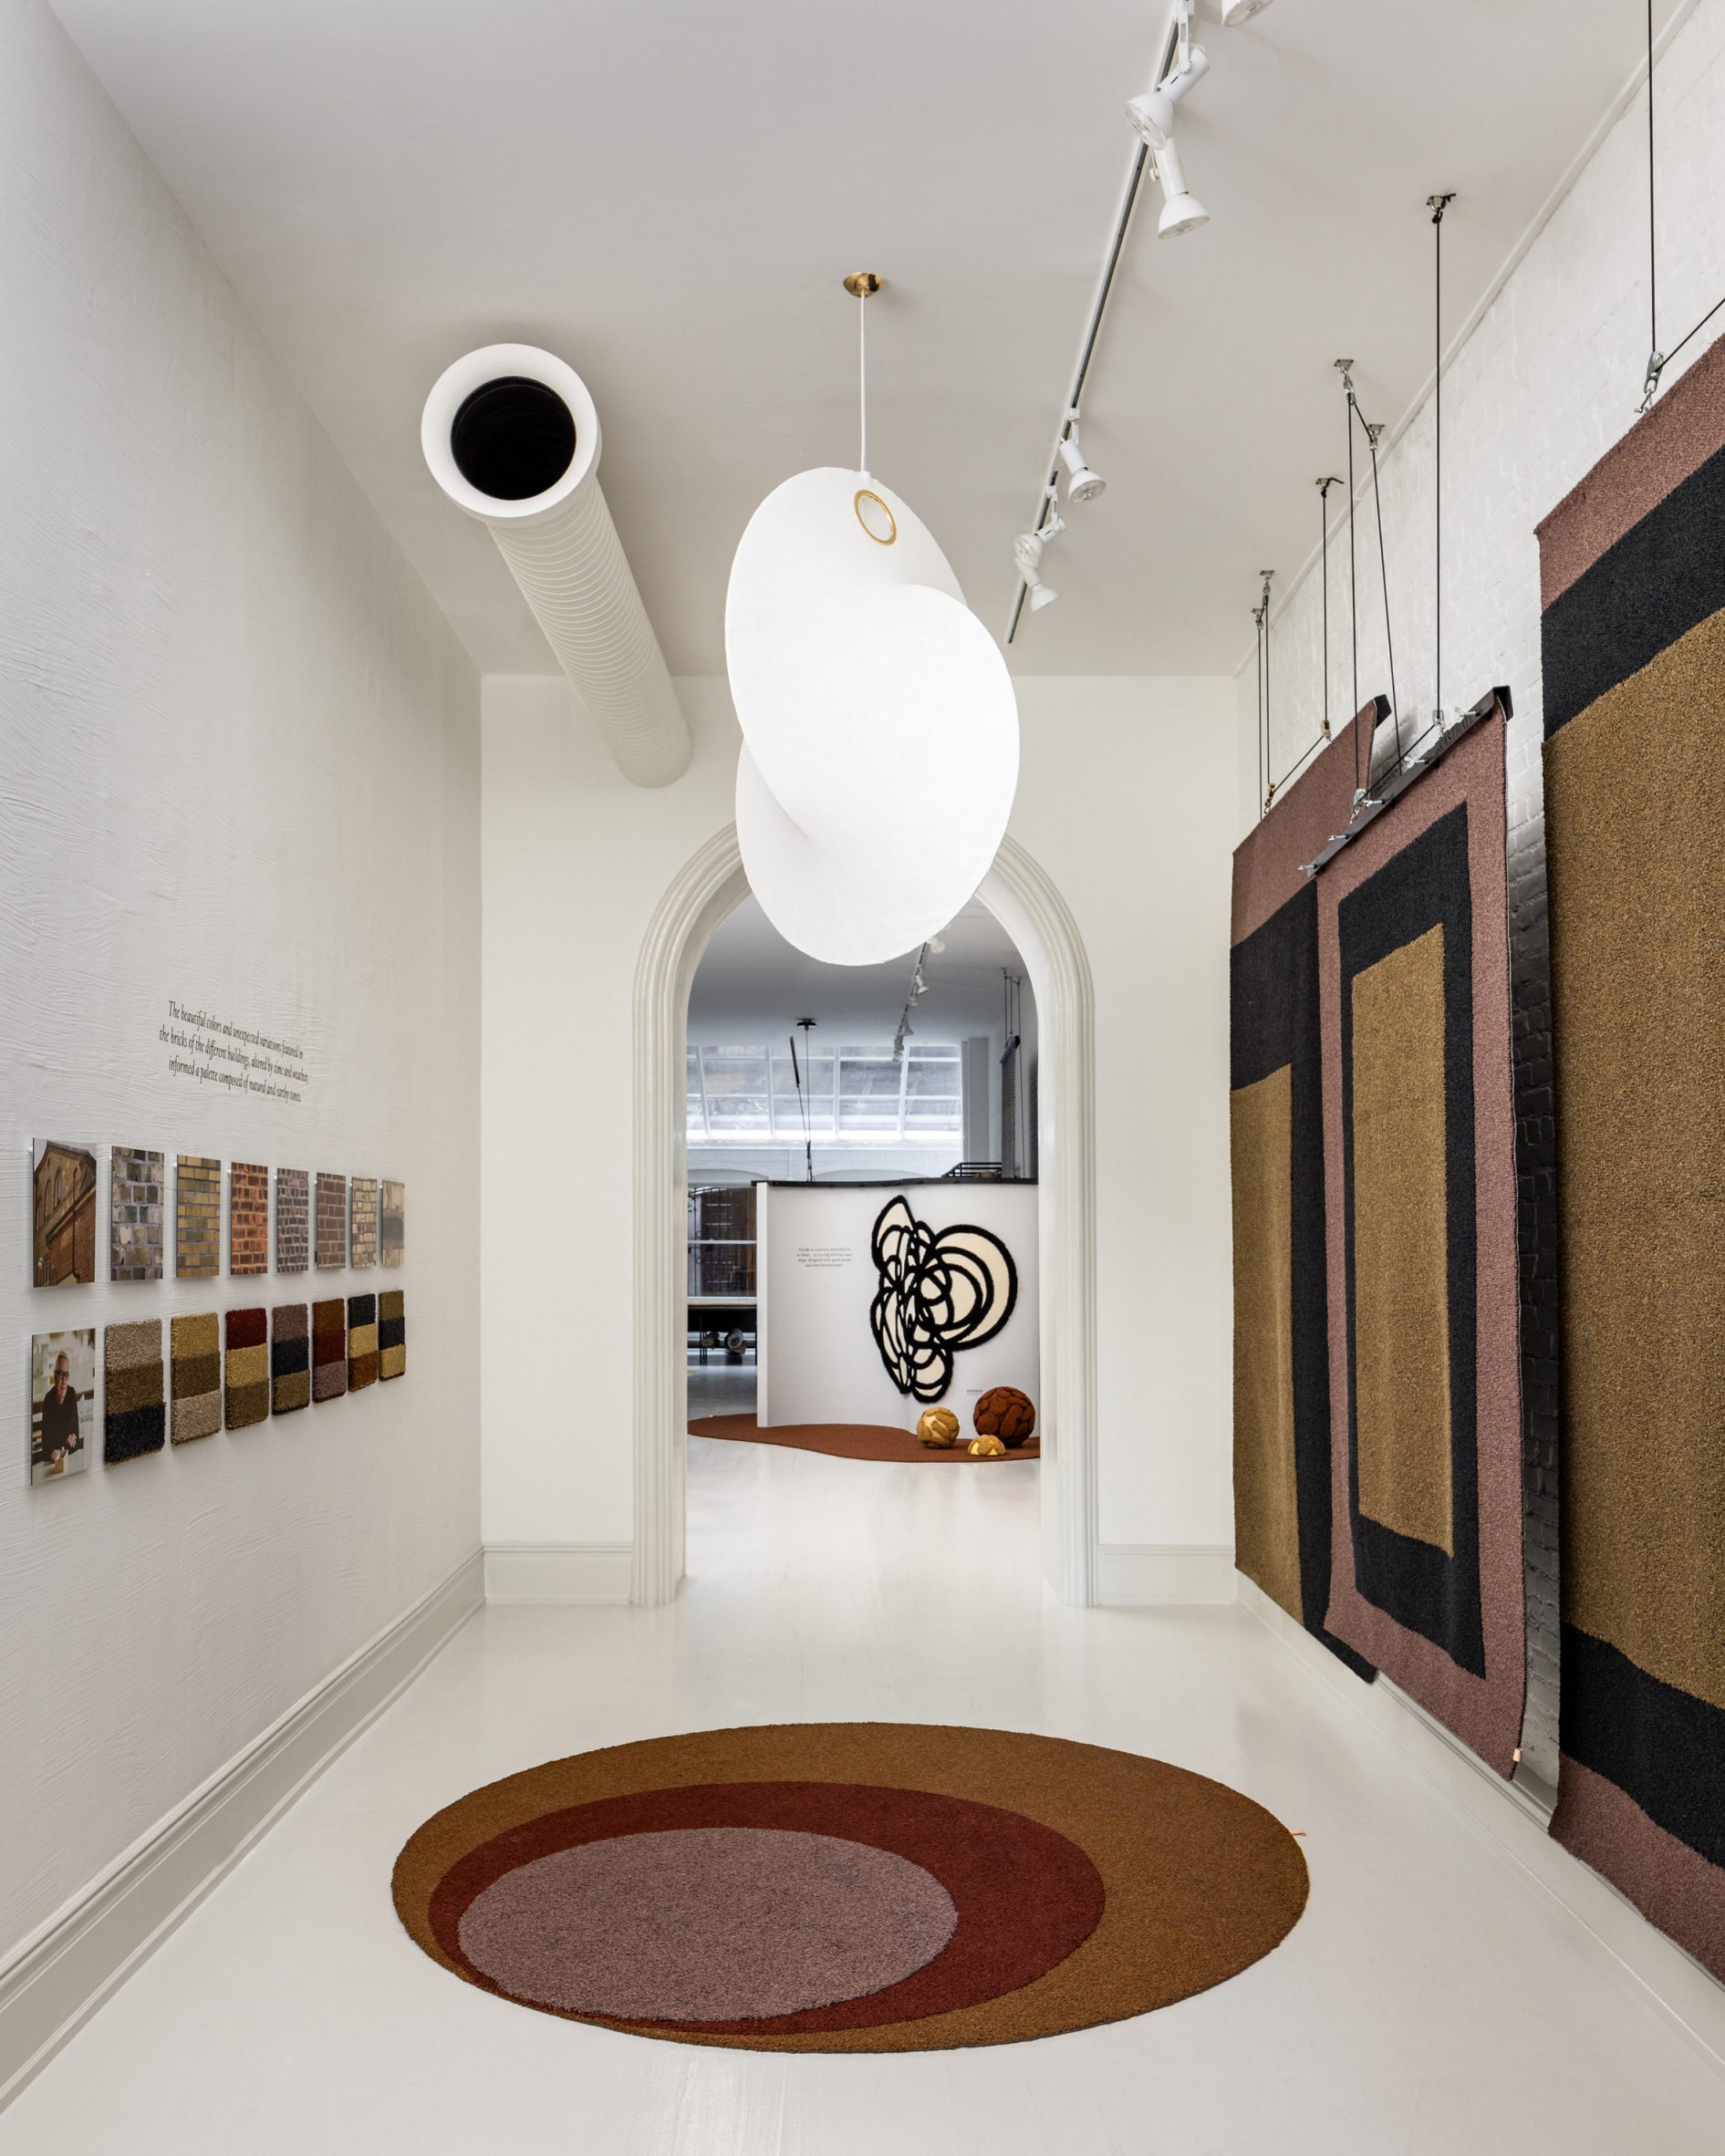 Rugs on display within Kasthall's showroom in New York City 